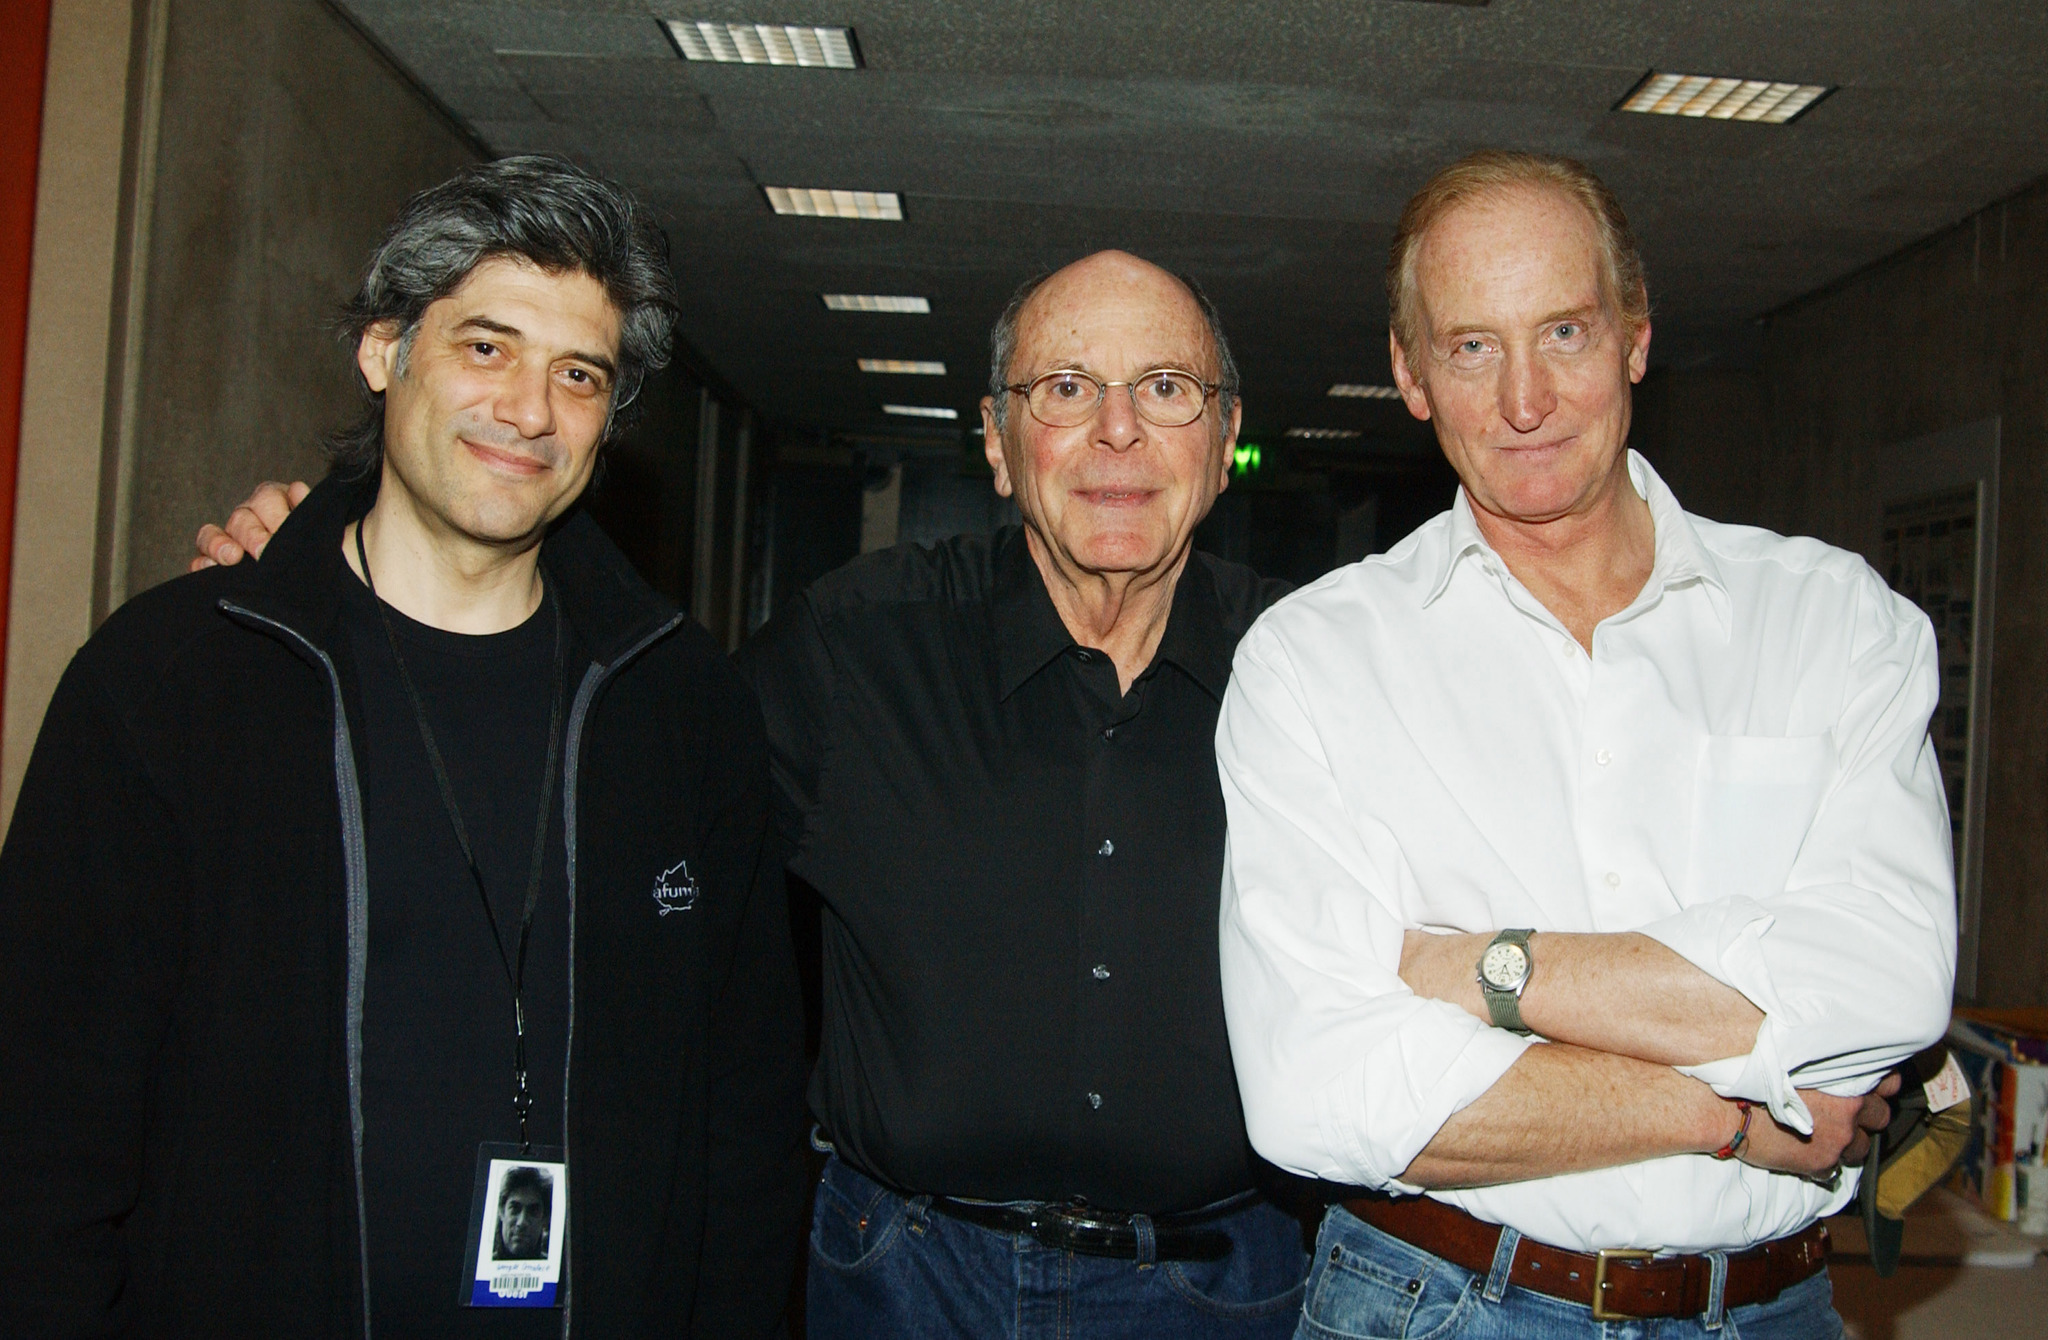 Charles Dance, Georges Corraface and Stewart Stern